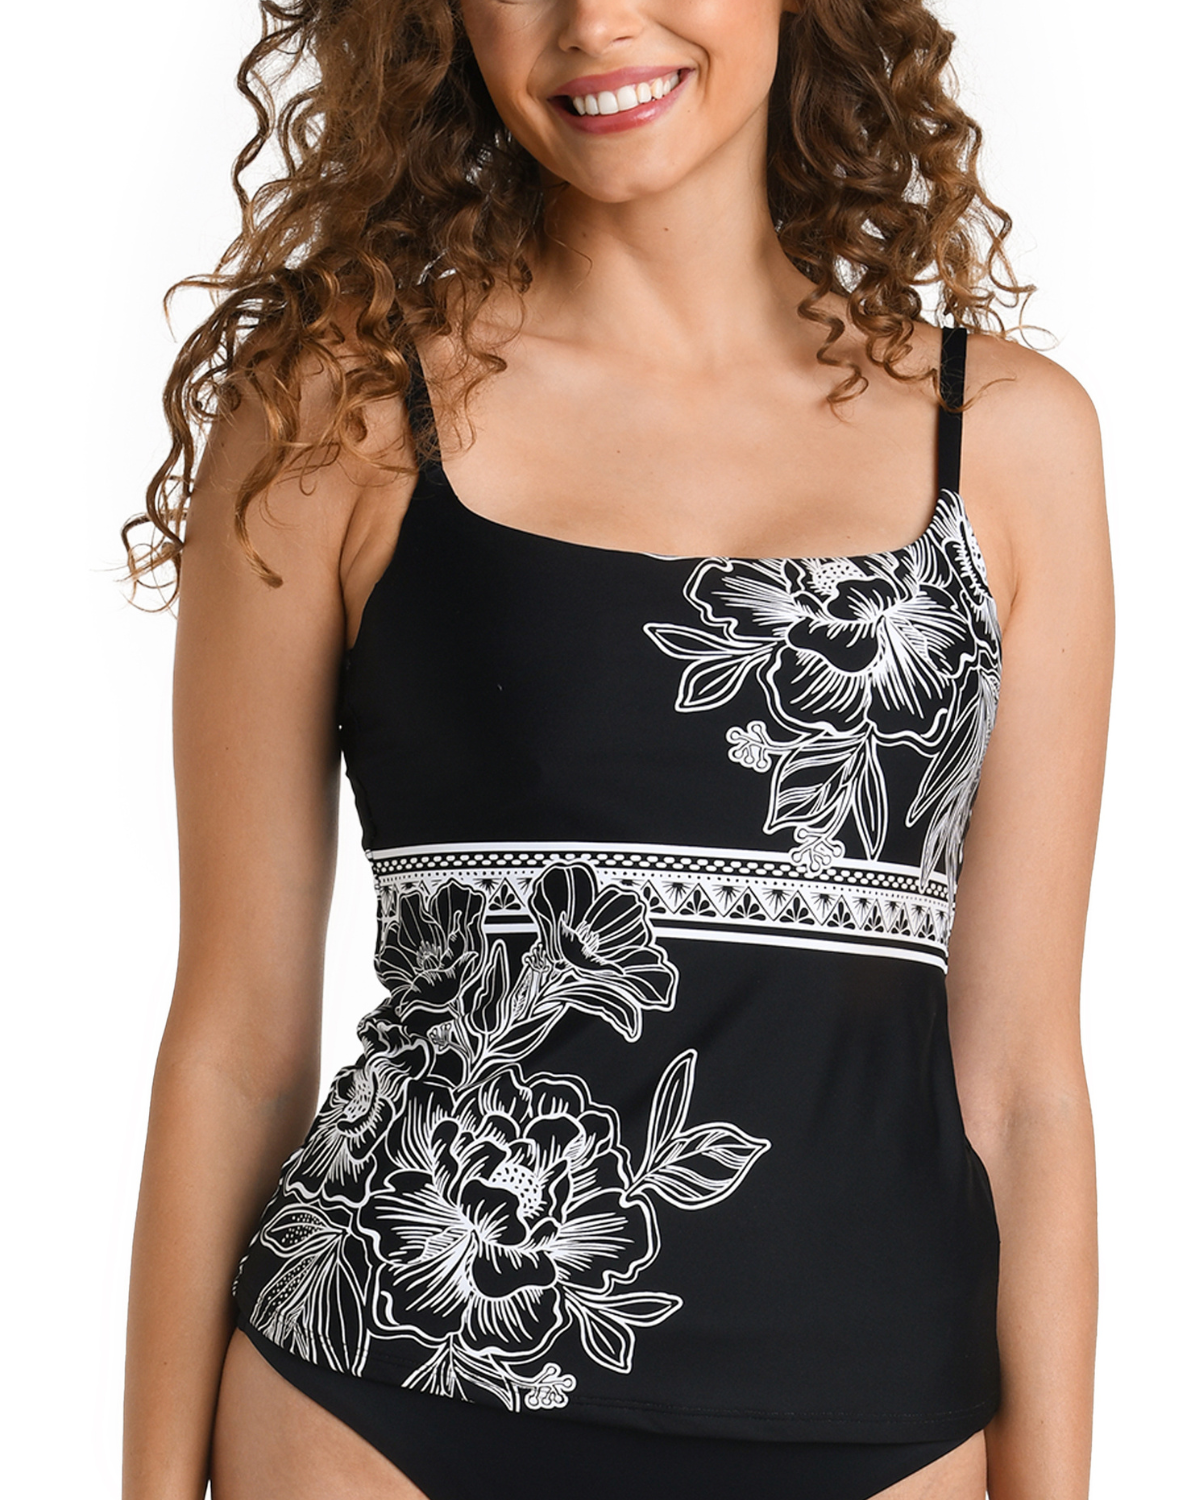 Model wearing an underwire tankini top in black with white floral outline details